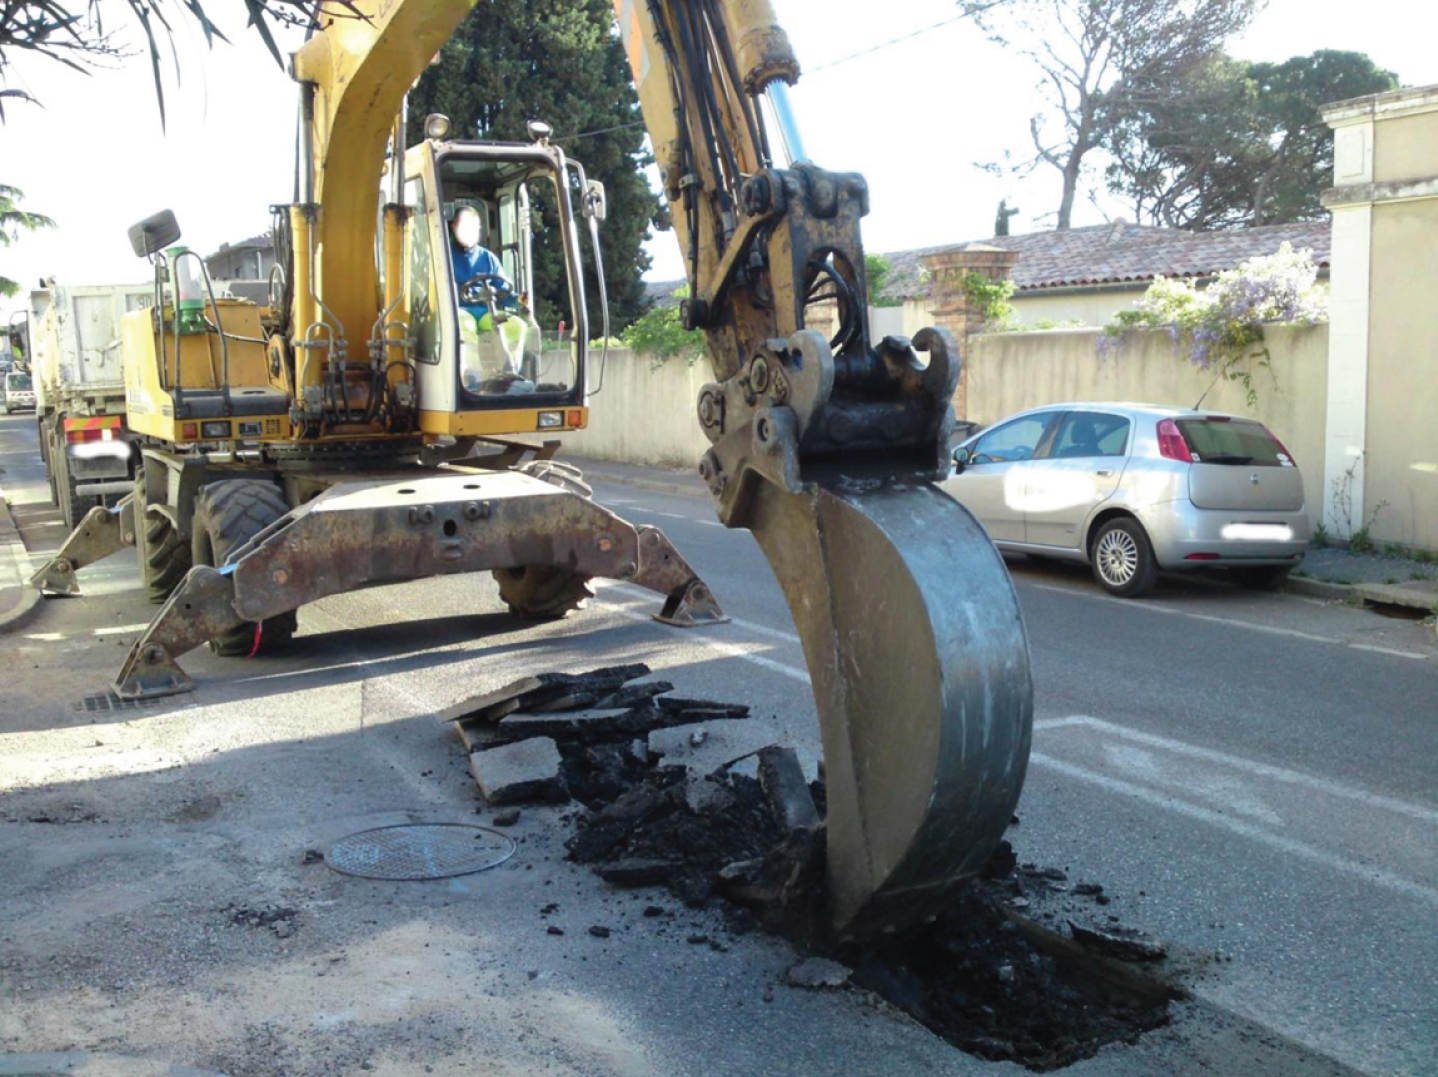 Worker driving a pneumatic shovel and digging a trench on a road.